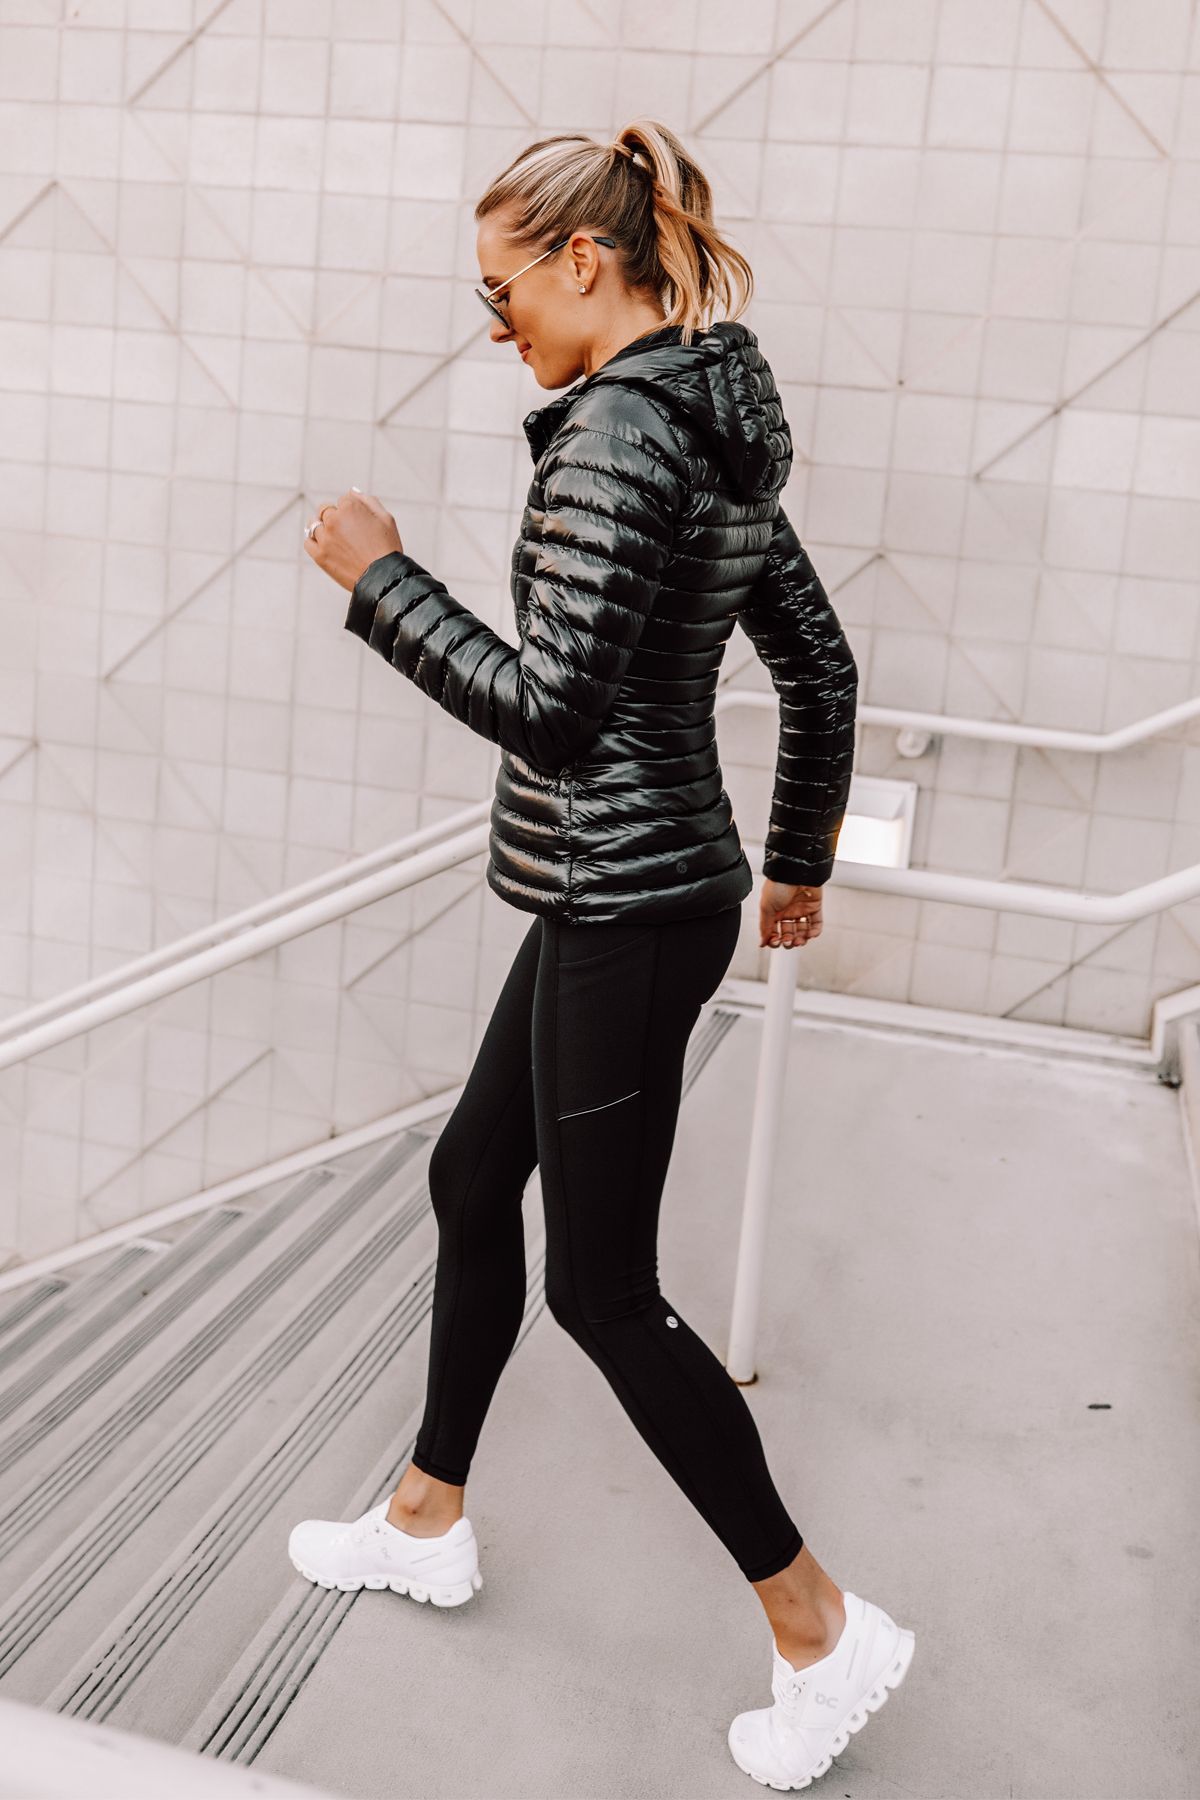 Athleisure, What to Wear to the Gym, All-Black Lululemon Outfit | Fashion Jackson - Athleisure, What to Wear to the Gym, All-Black Lululemon Outfit | Fashion Jackson -   19 fitness Outfits fashion ideas